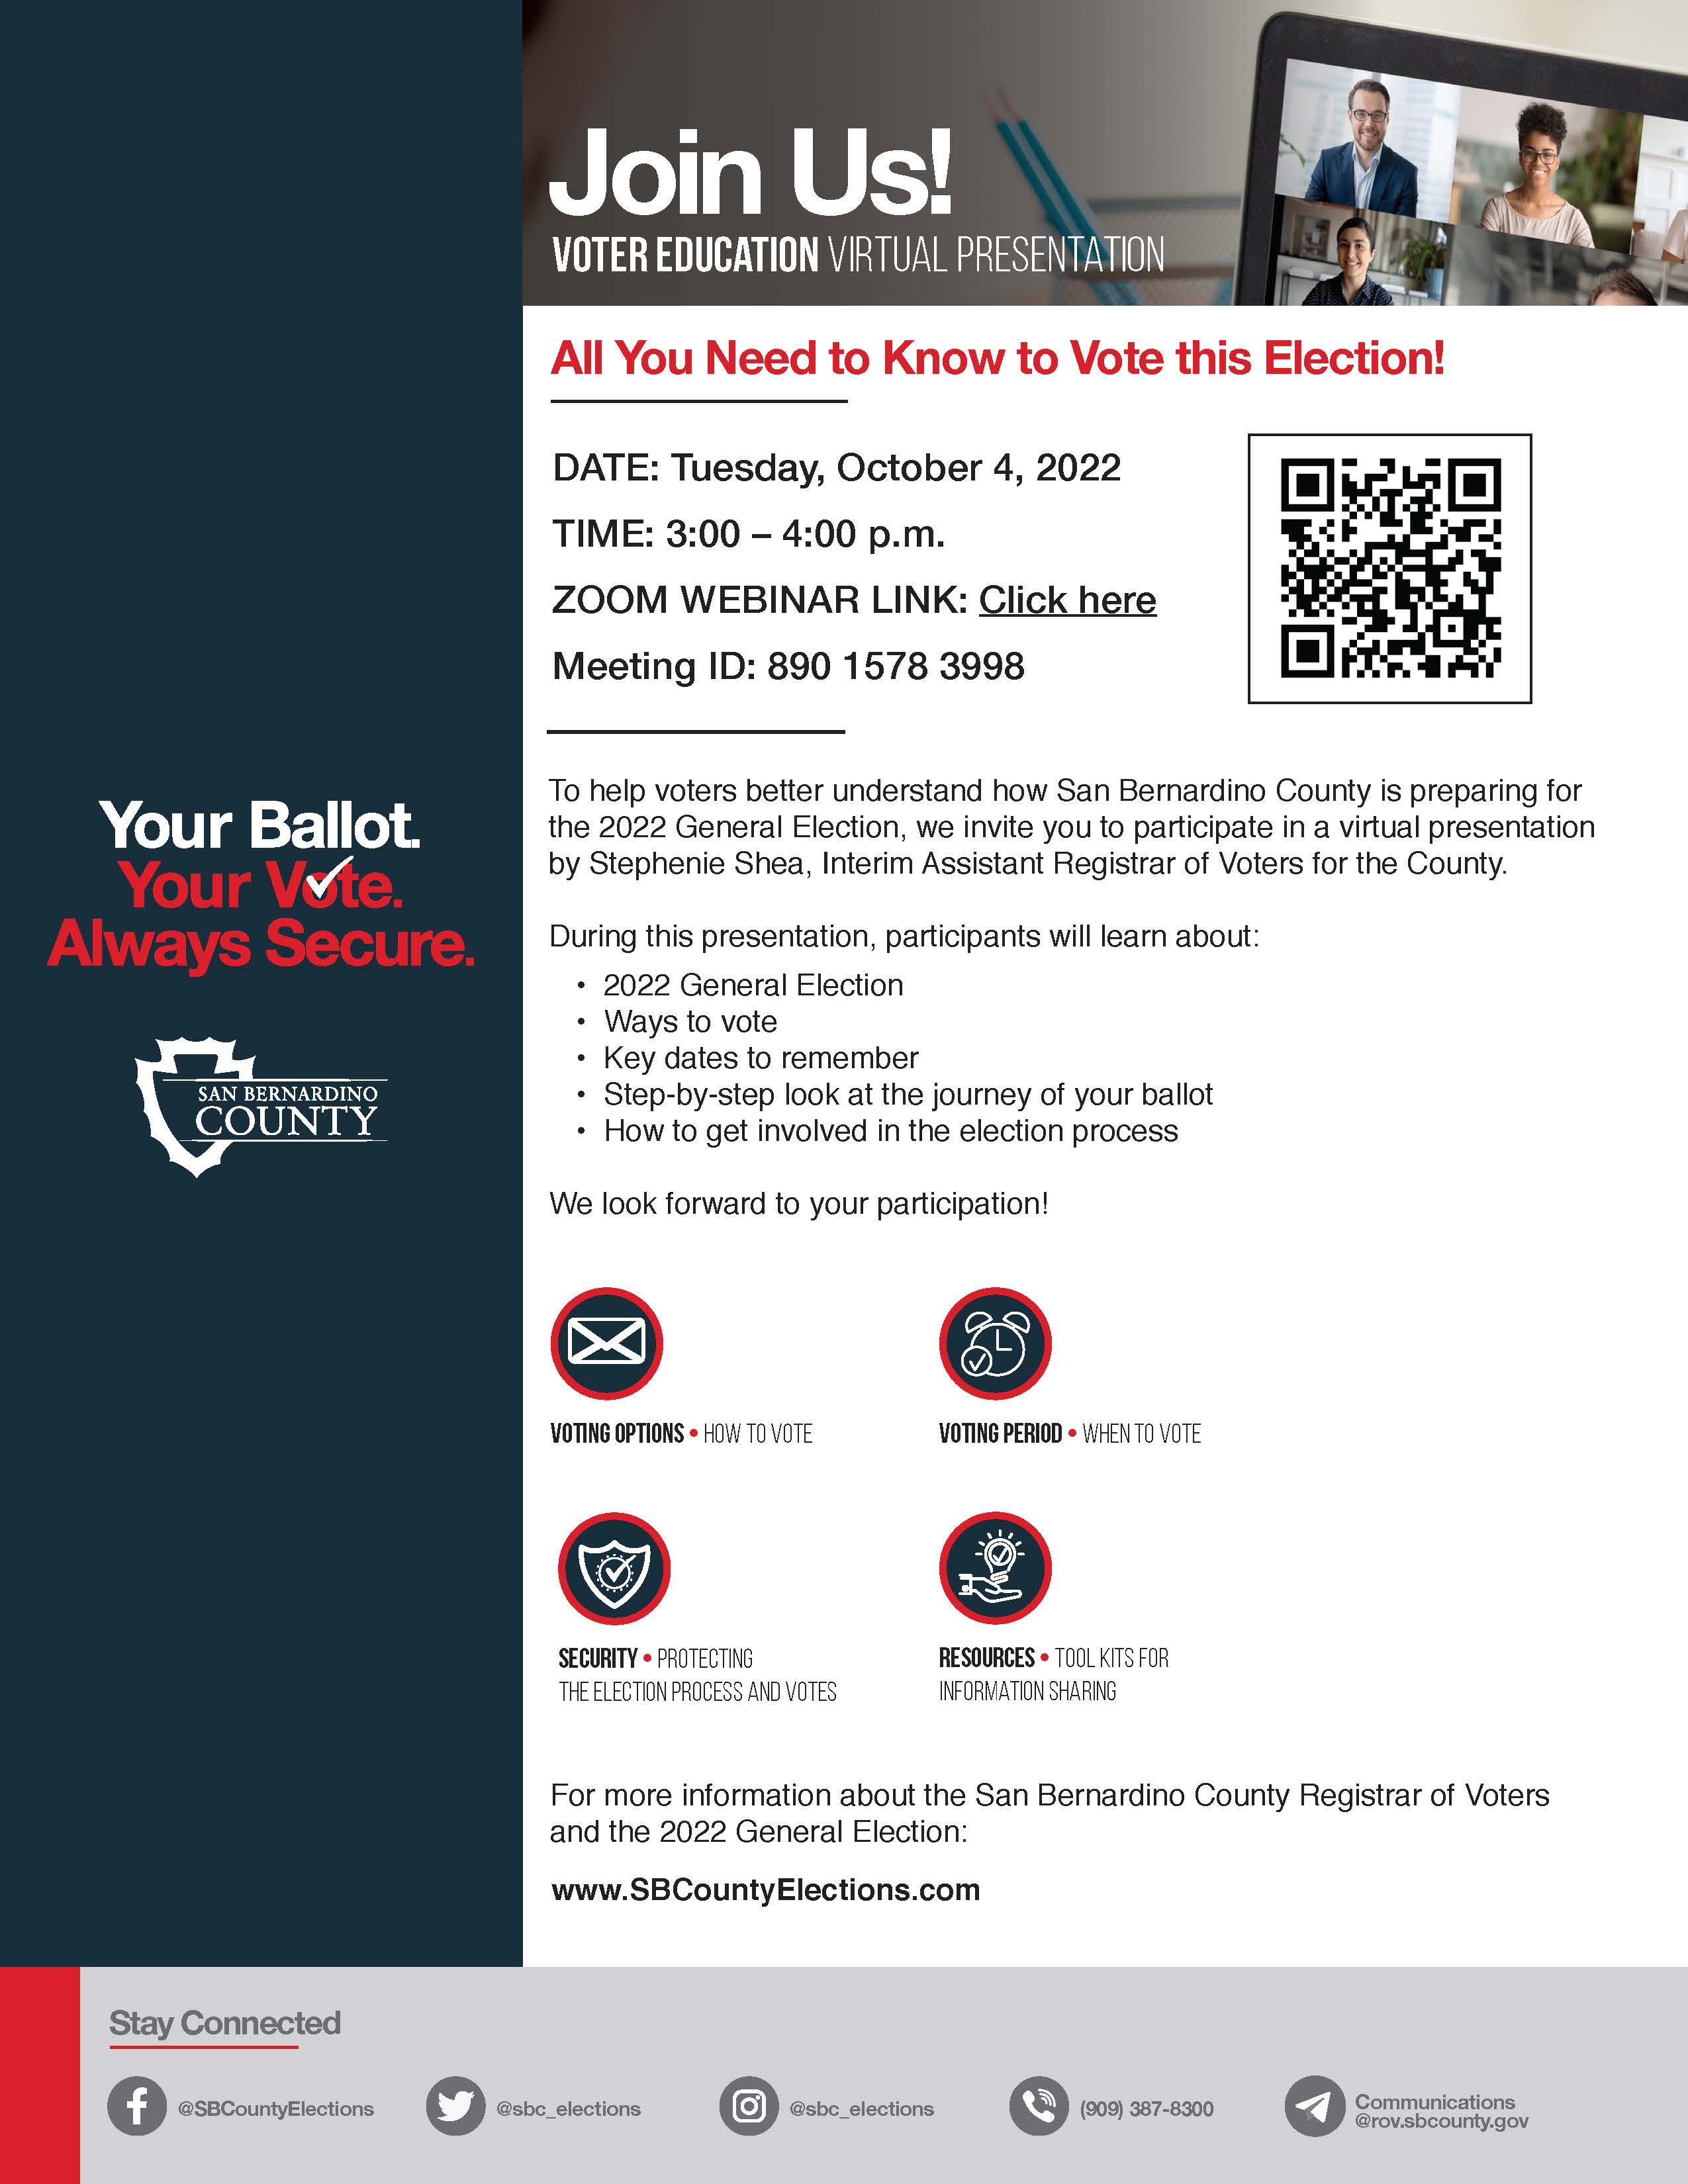 Voter Education: All You Need to Know to Vote